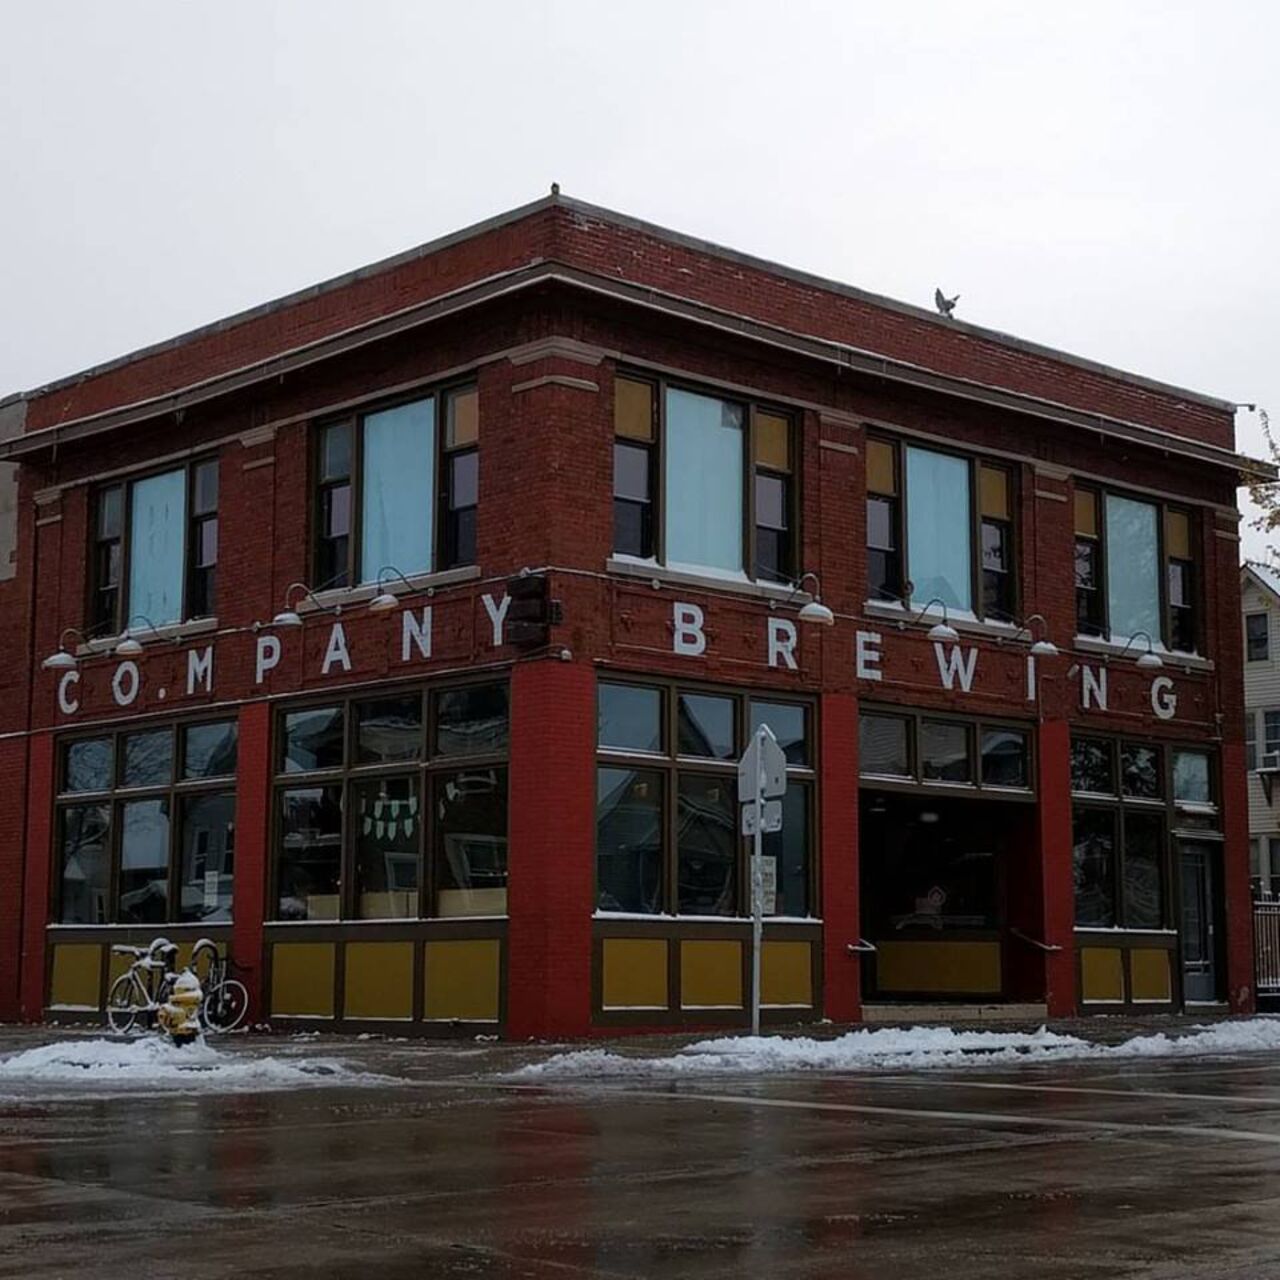 A photo of Company Brewing